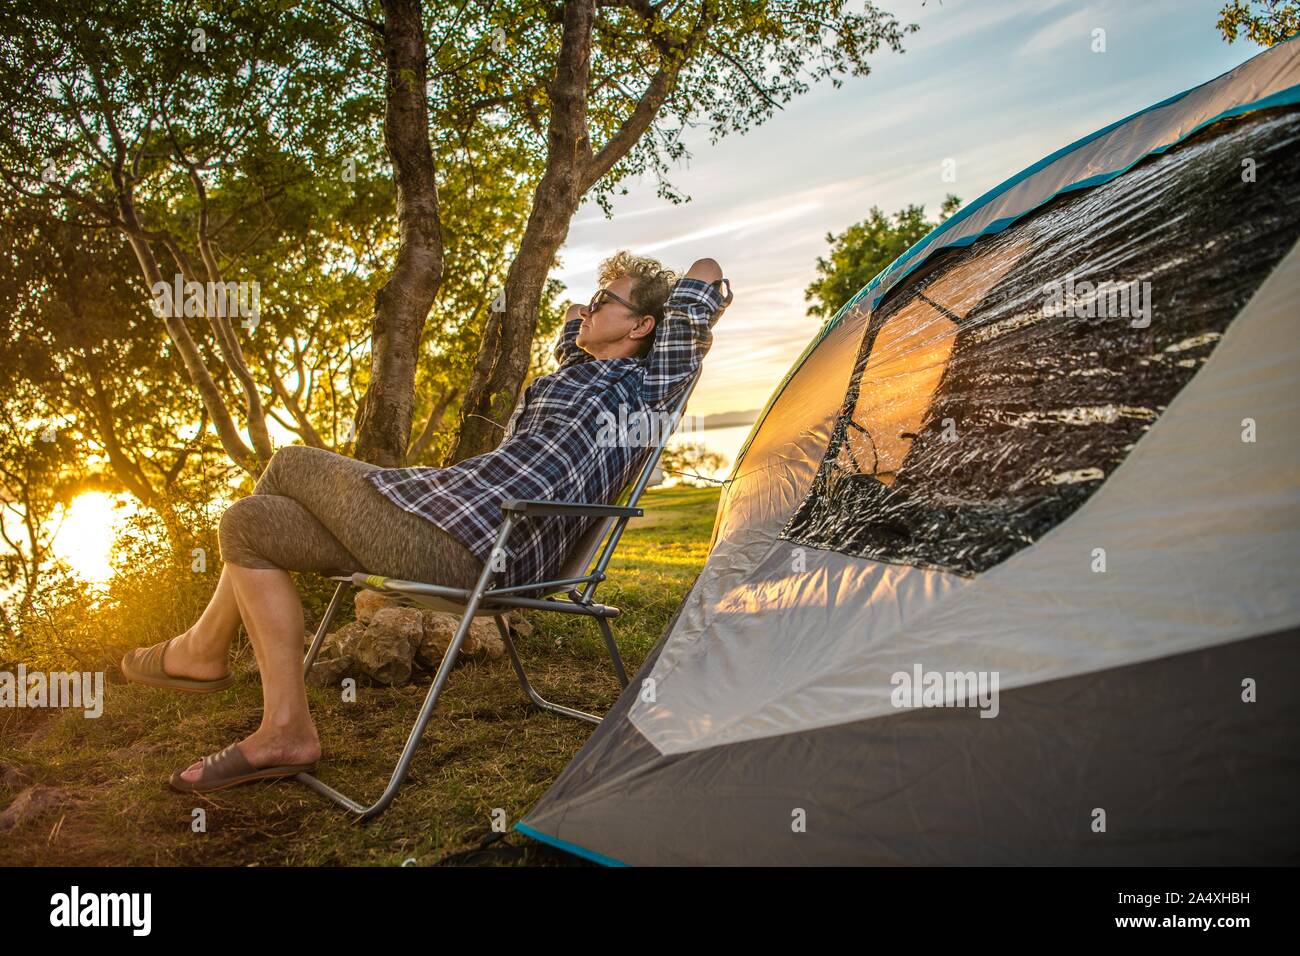 Retirement Summer Trip with a Tent. Caucasian Woman in Her 60s in Front of Her Tent Enjoying Her Free Time. Stock Photo